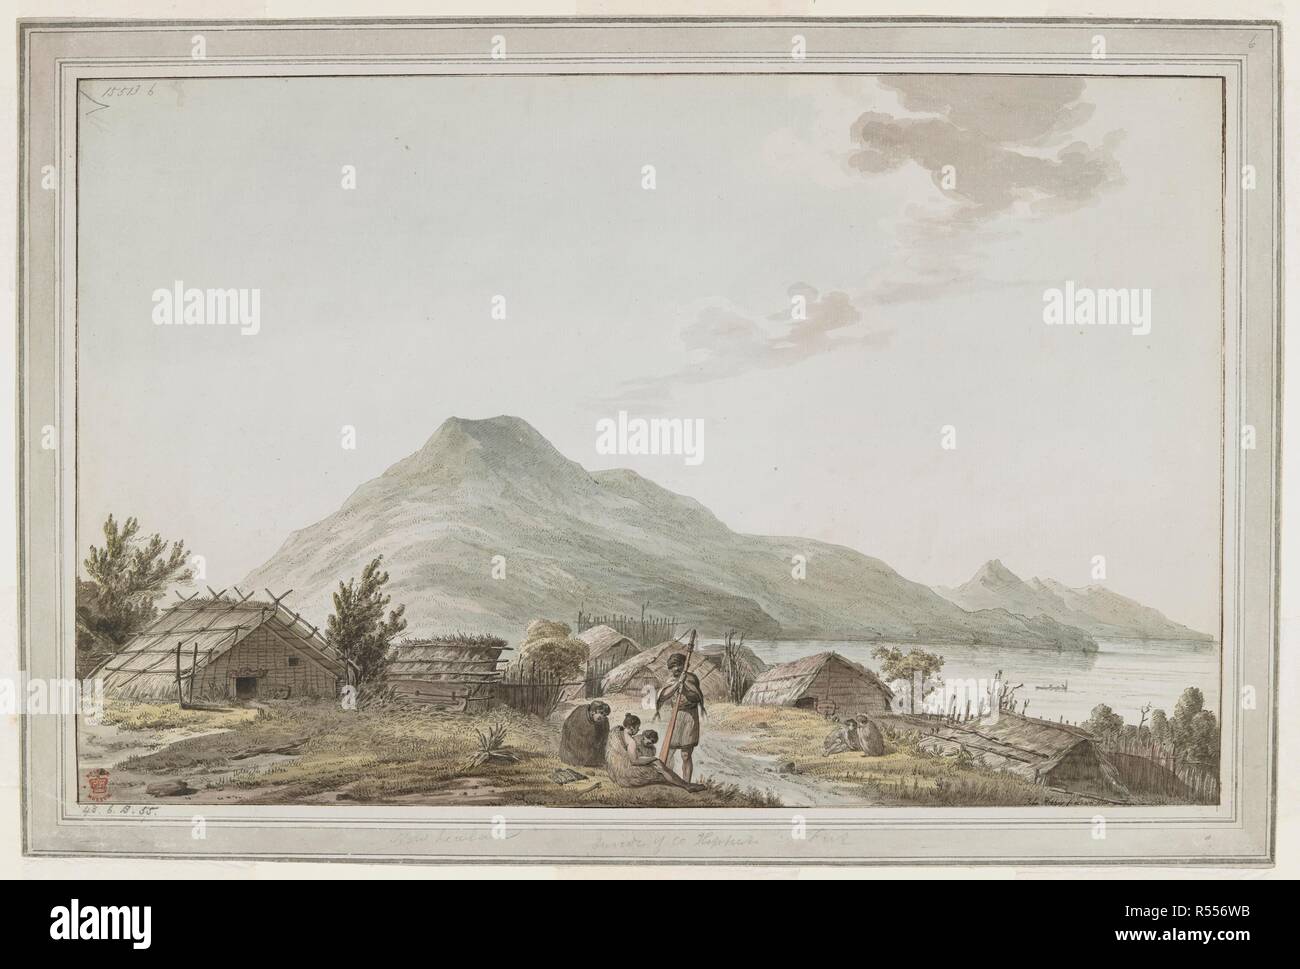 [Whole drawing] View of the Hippah, or fortified village, at the south-west point of Motuara in Queen Charlotte Sound. The view looks north, with Motuara in the background. The drawing may have resulted from Captain Cook's visit on 15 February 1777. The Maori habitations are within a stockade of stakes, seen on right. A small group of Maoris are by a pathway, and two others are seated further back. Drawings executed by John Webber during the Third Voyage of Captain Cook, 1777-1779. 1777.    . Source: Add. 15513, No.6. Language: English. Stock Photo